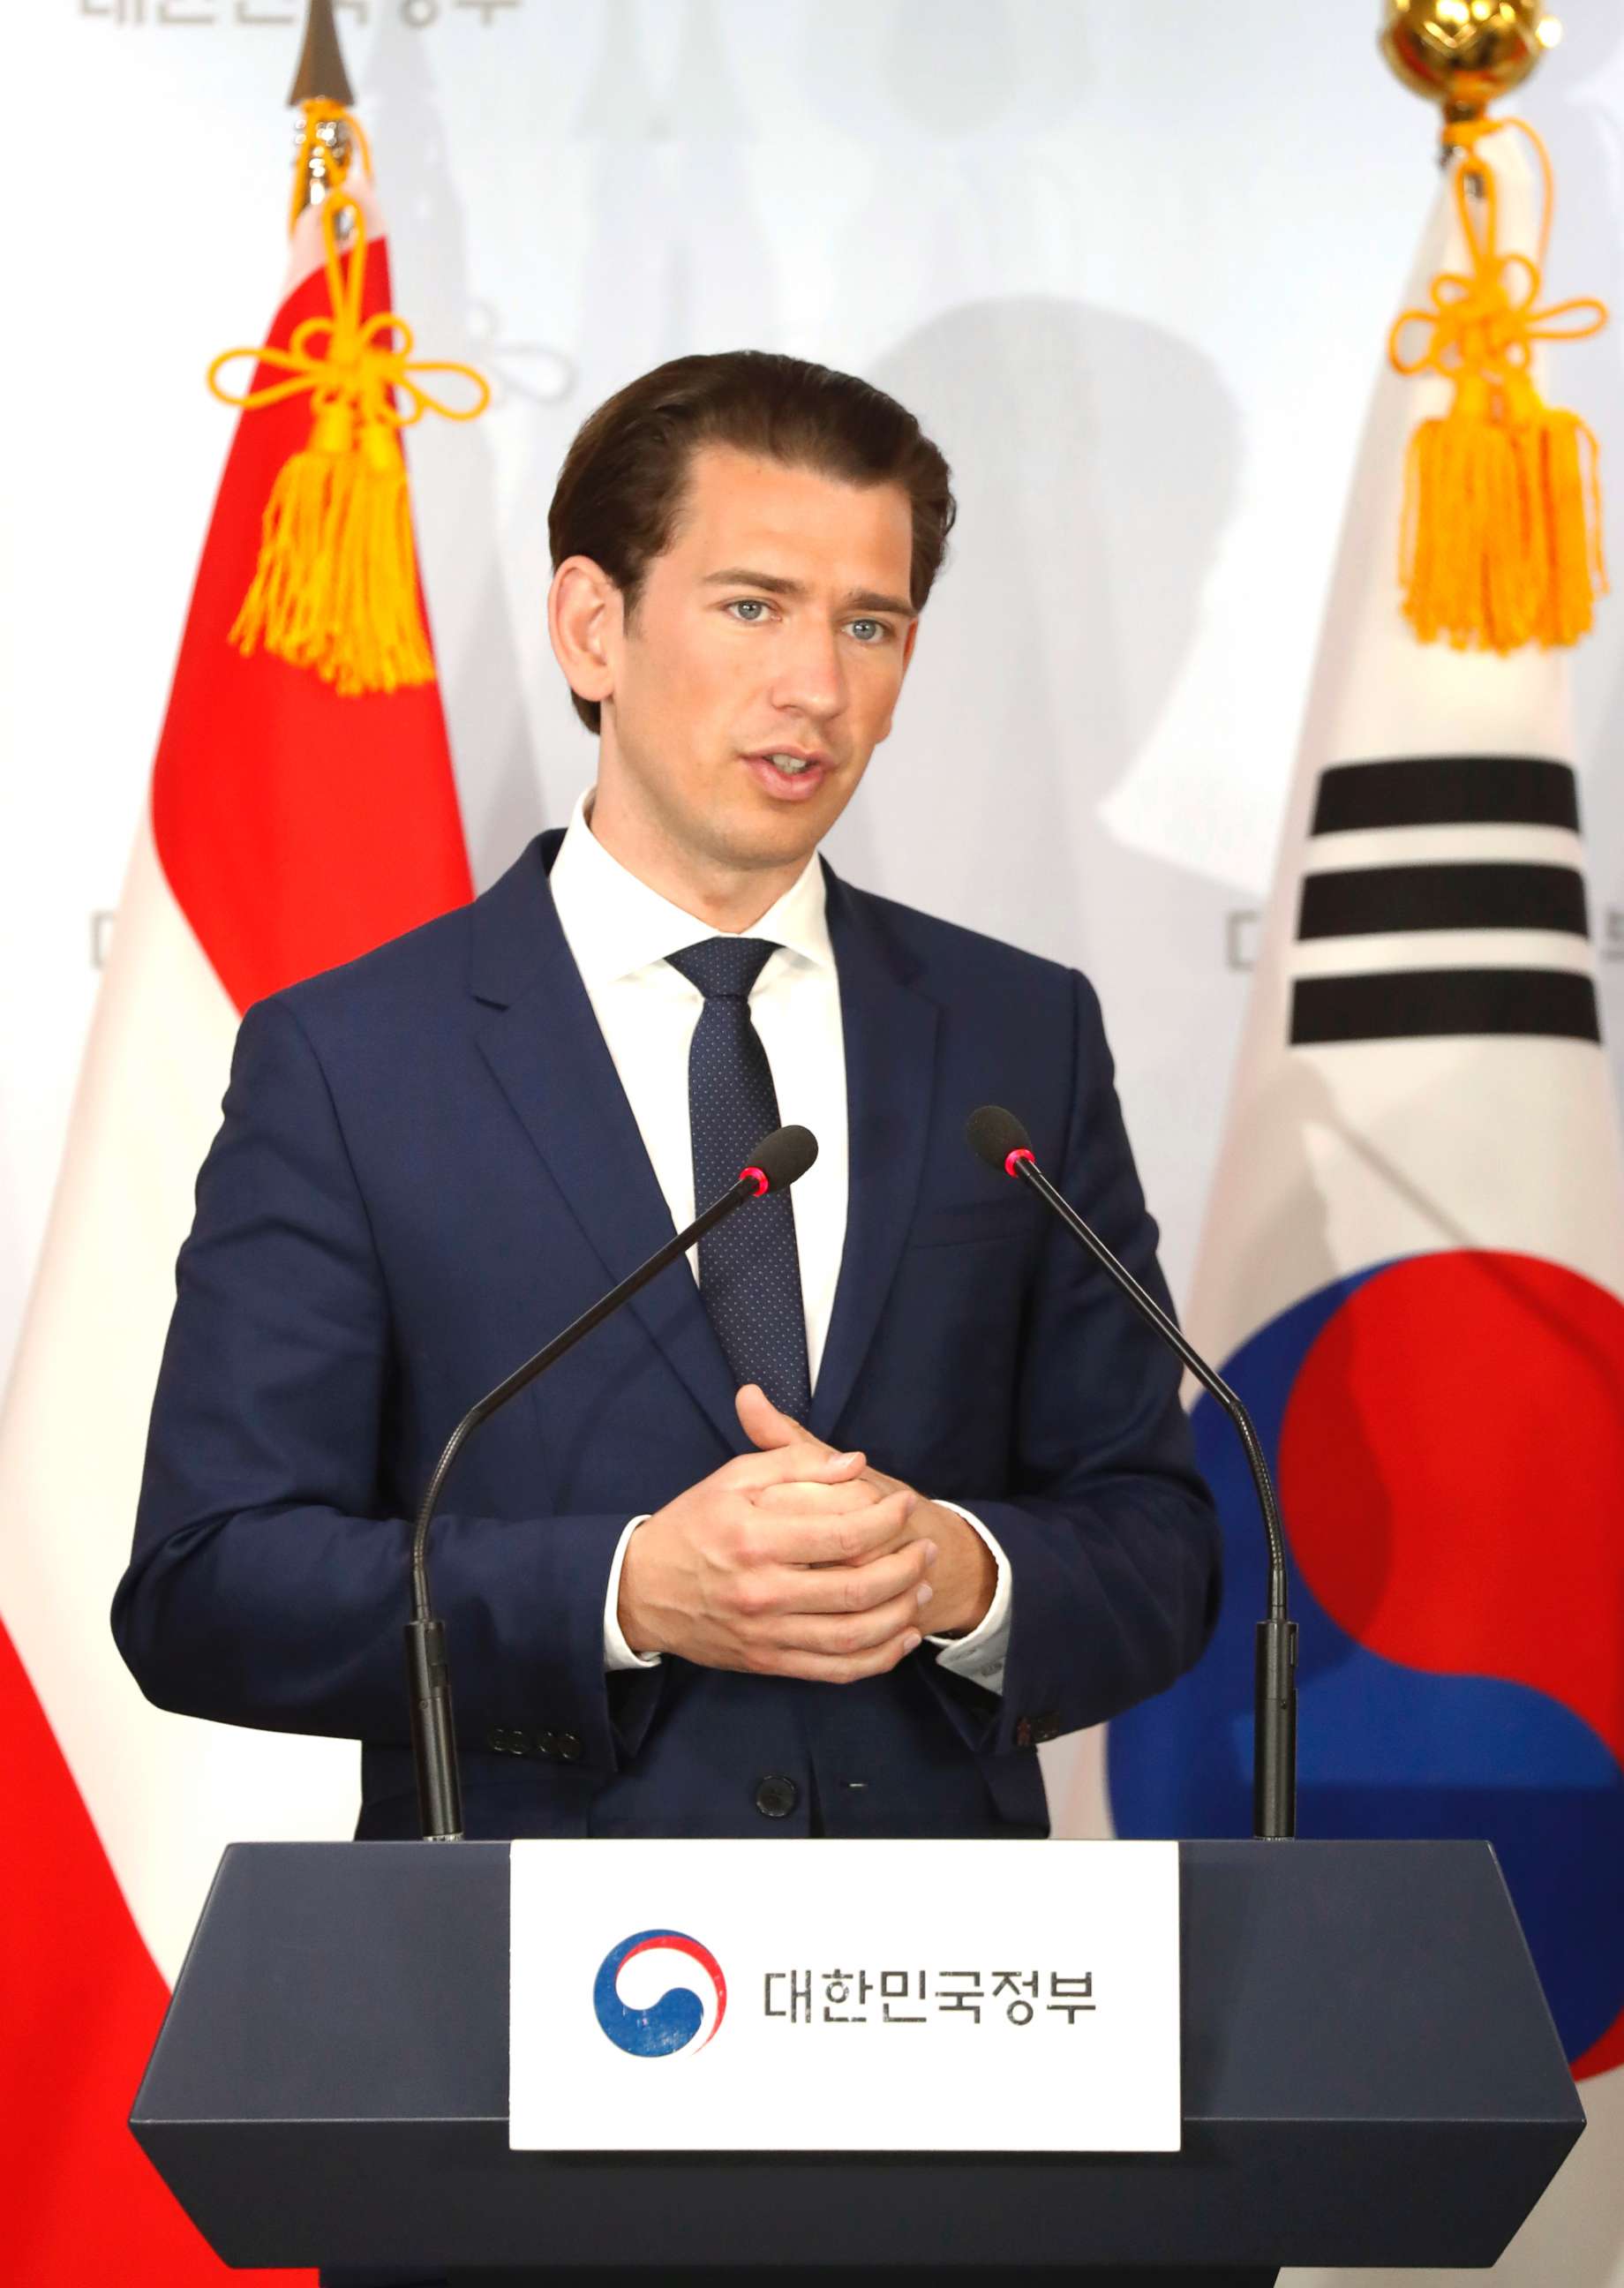 PHOTO: Austria's Chancellor Sebastian Kurz attends a press conference at the Presidential Blue House on Feb. 14, 2019 in Seoul.